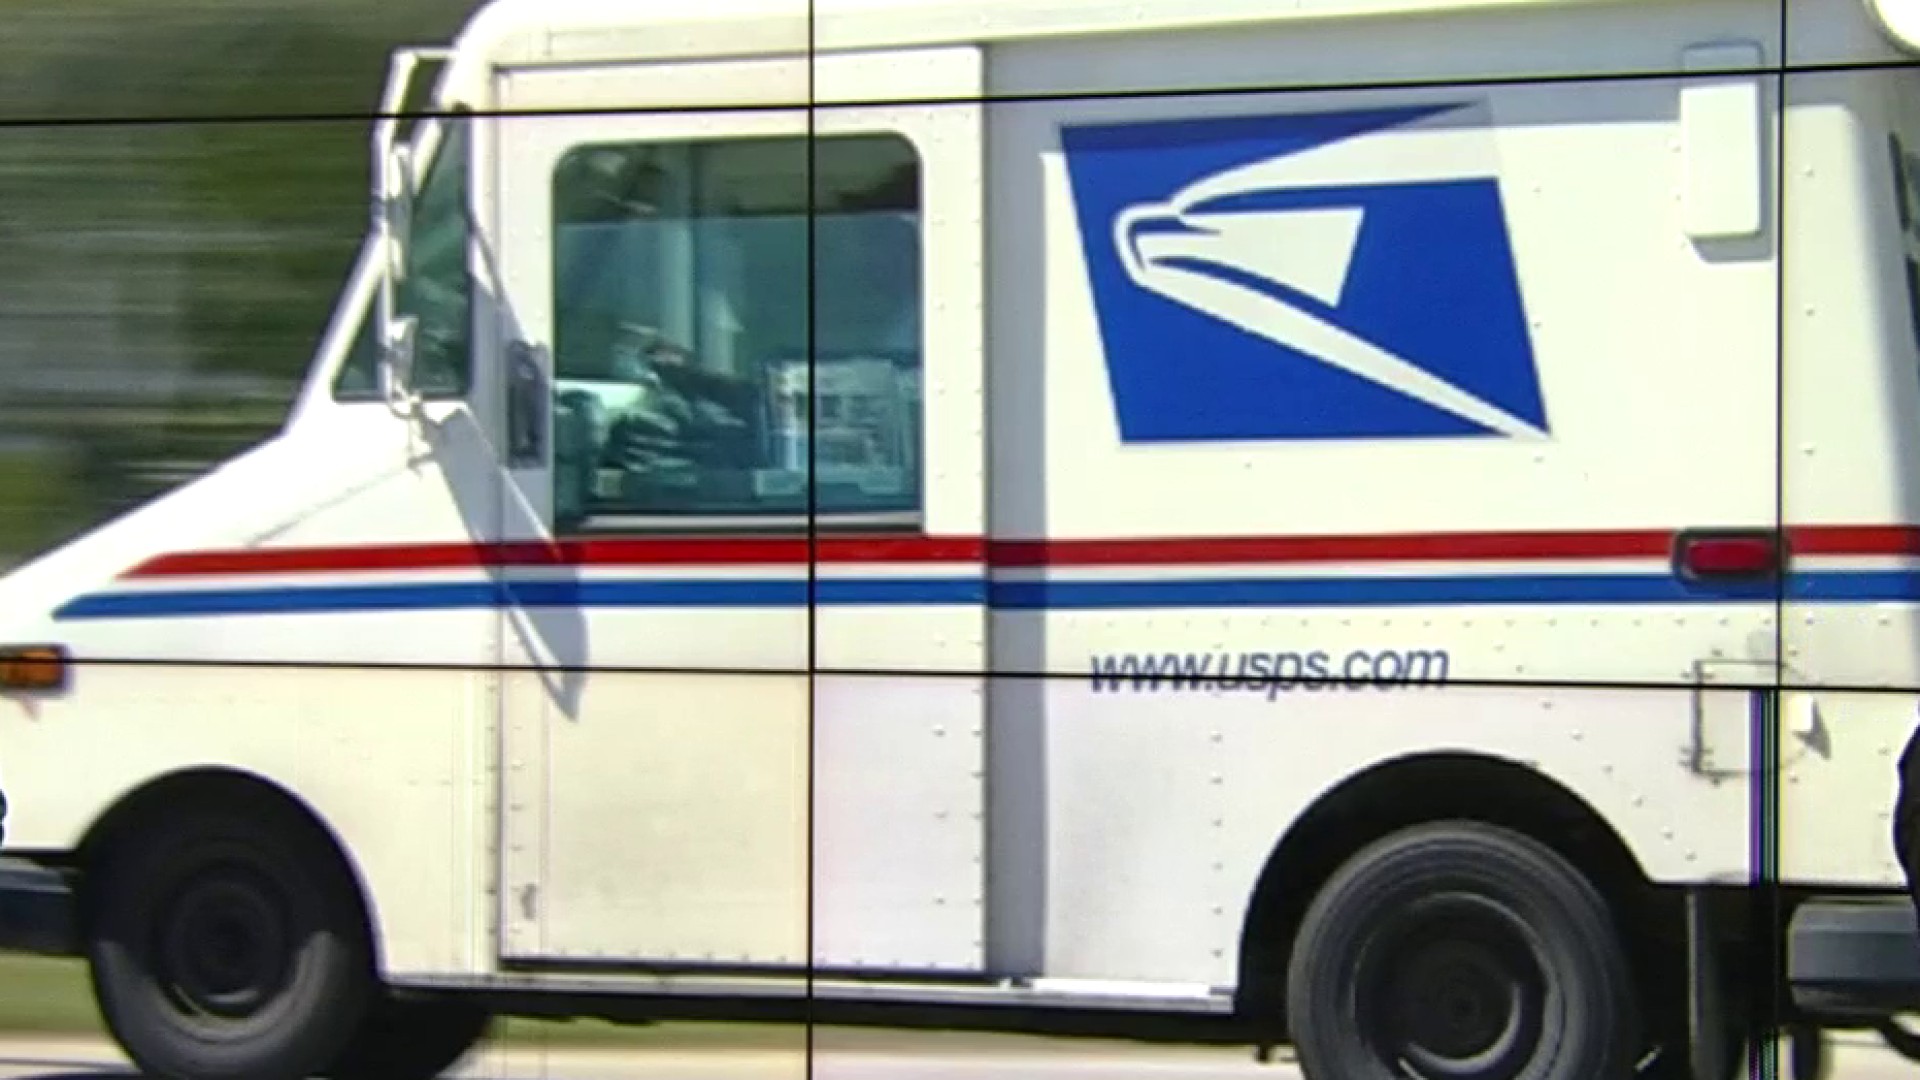 Snail mail: USPS deliveries start to slow